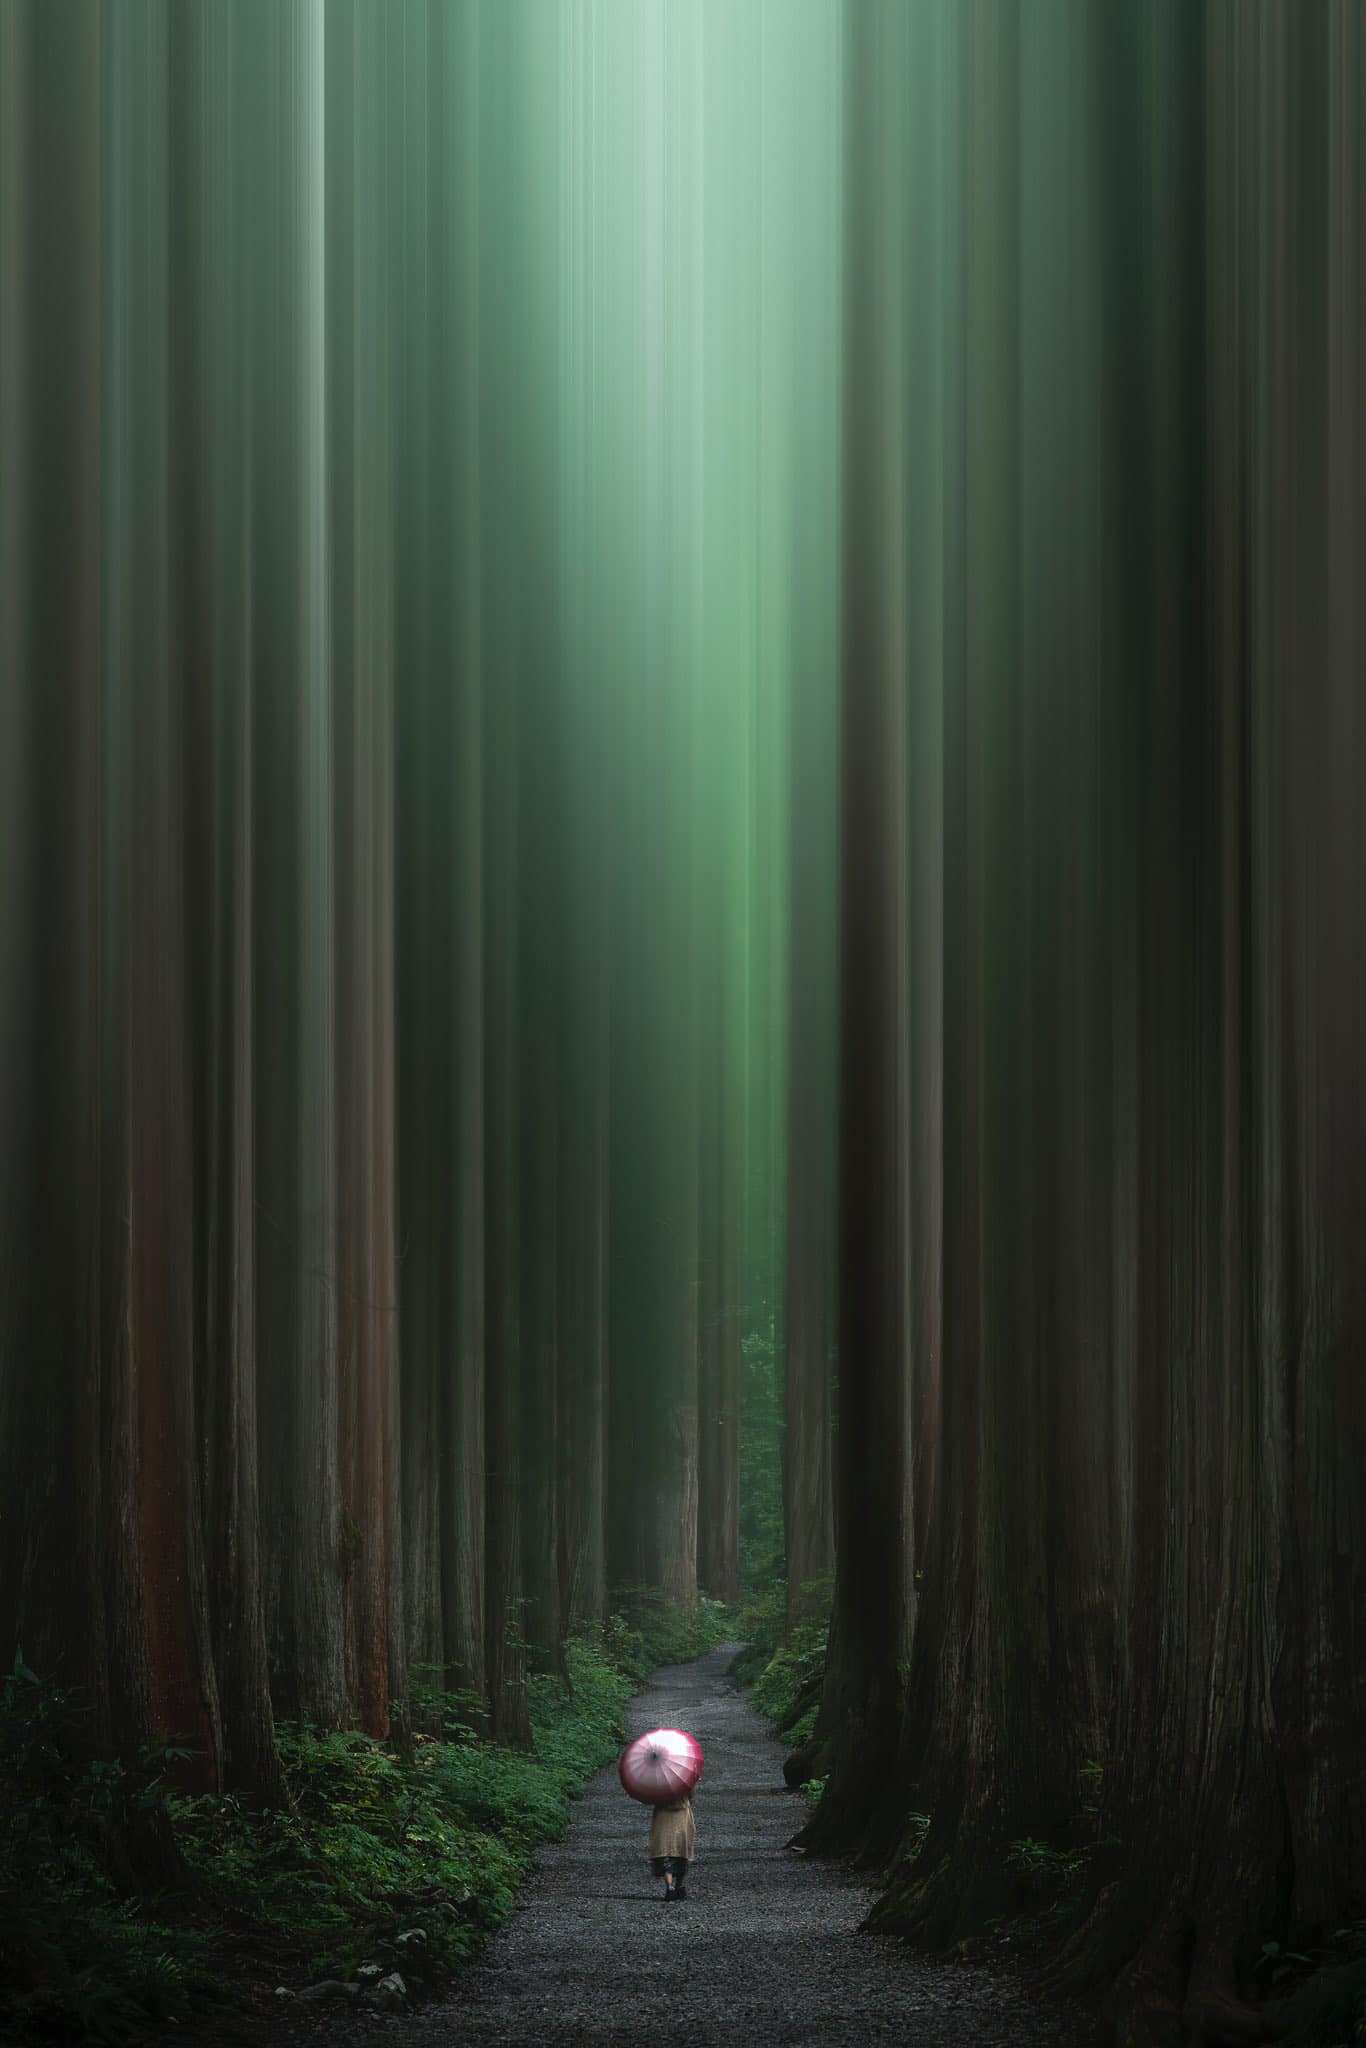 Into the mysterious forest by Bee